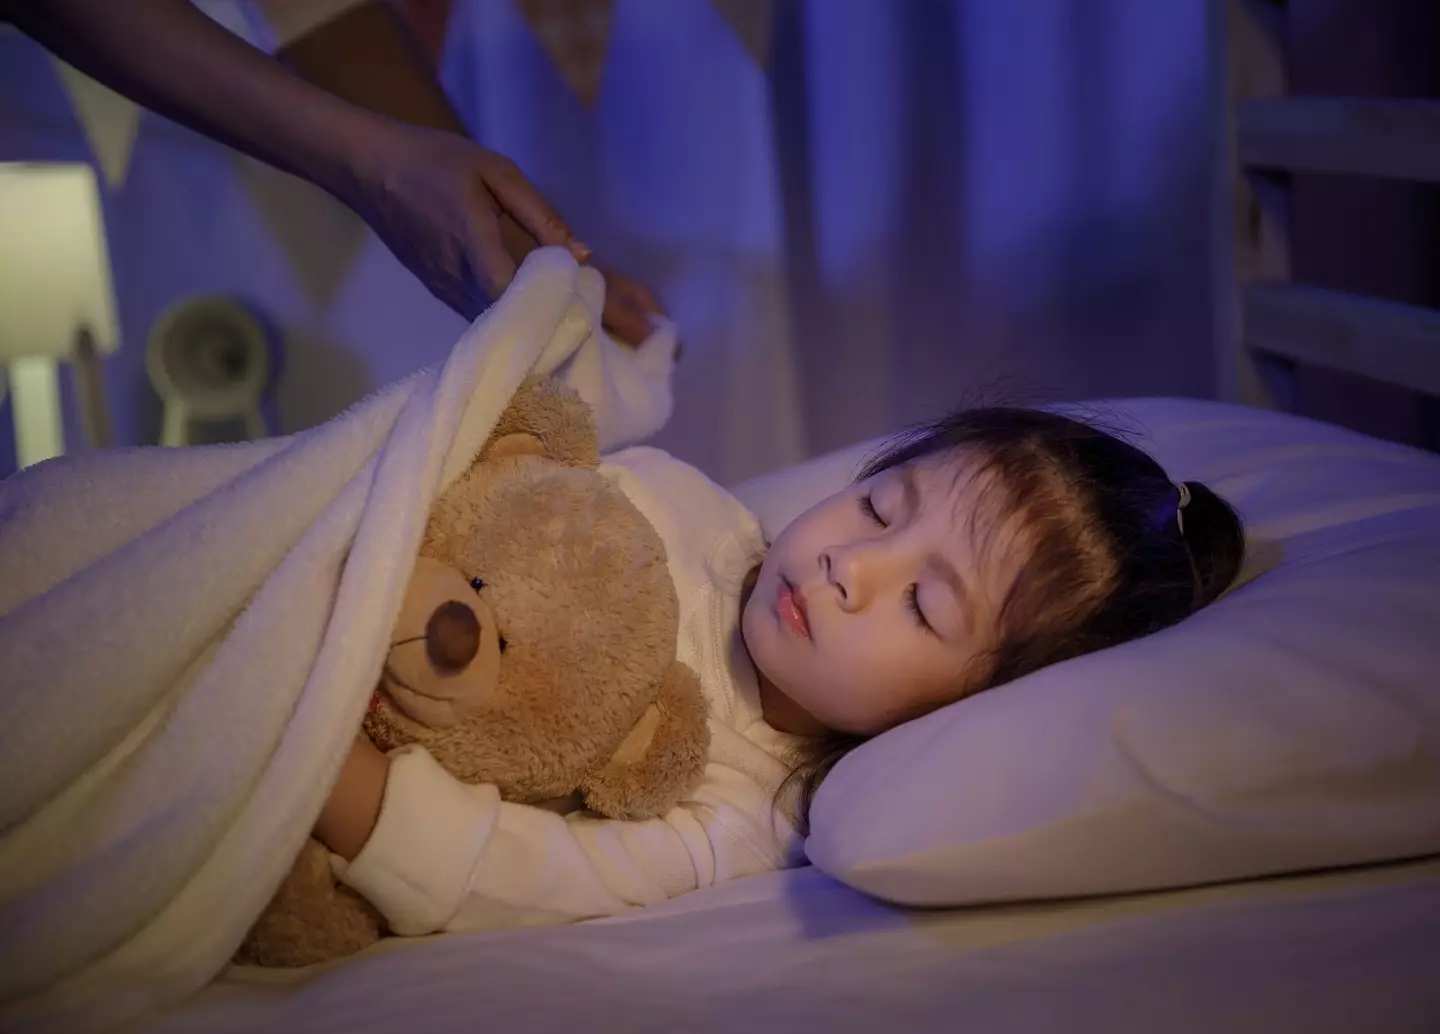 Children respond well to routine at bedtime.